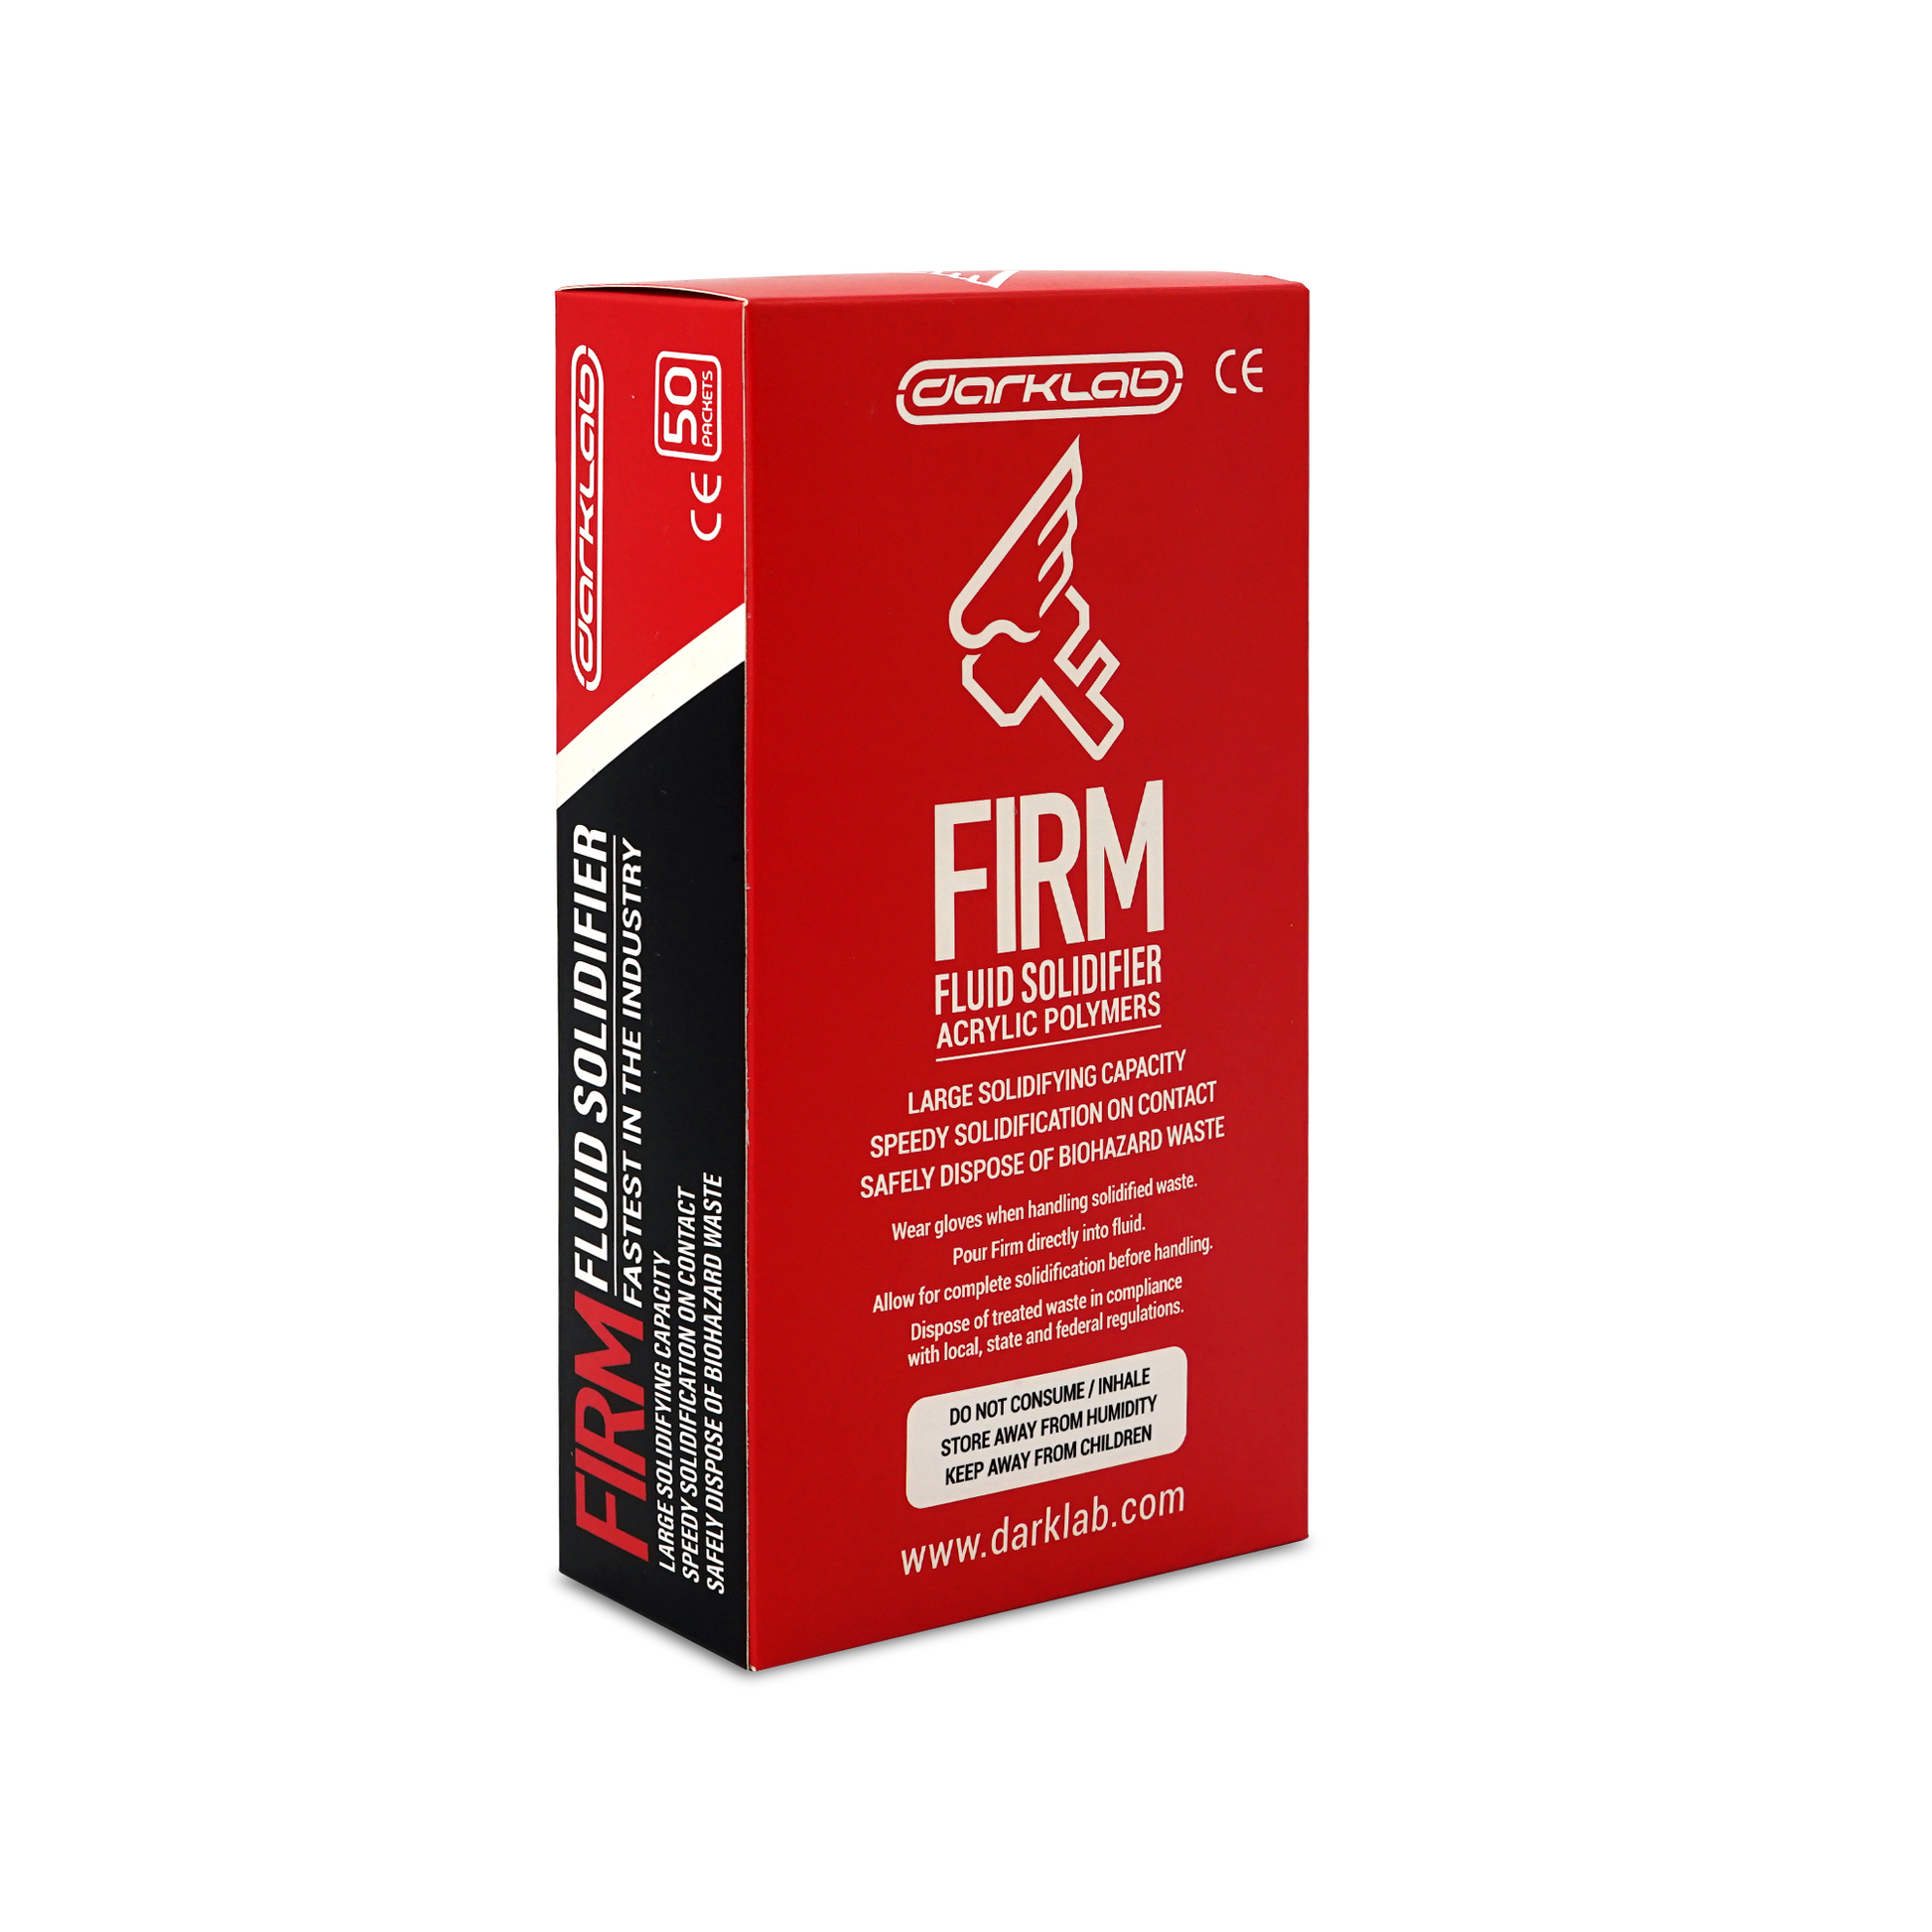 FIRM FLUID SOLIDIFIER 50 PACK BOX (RED)